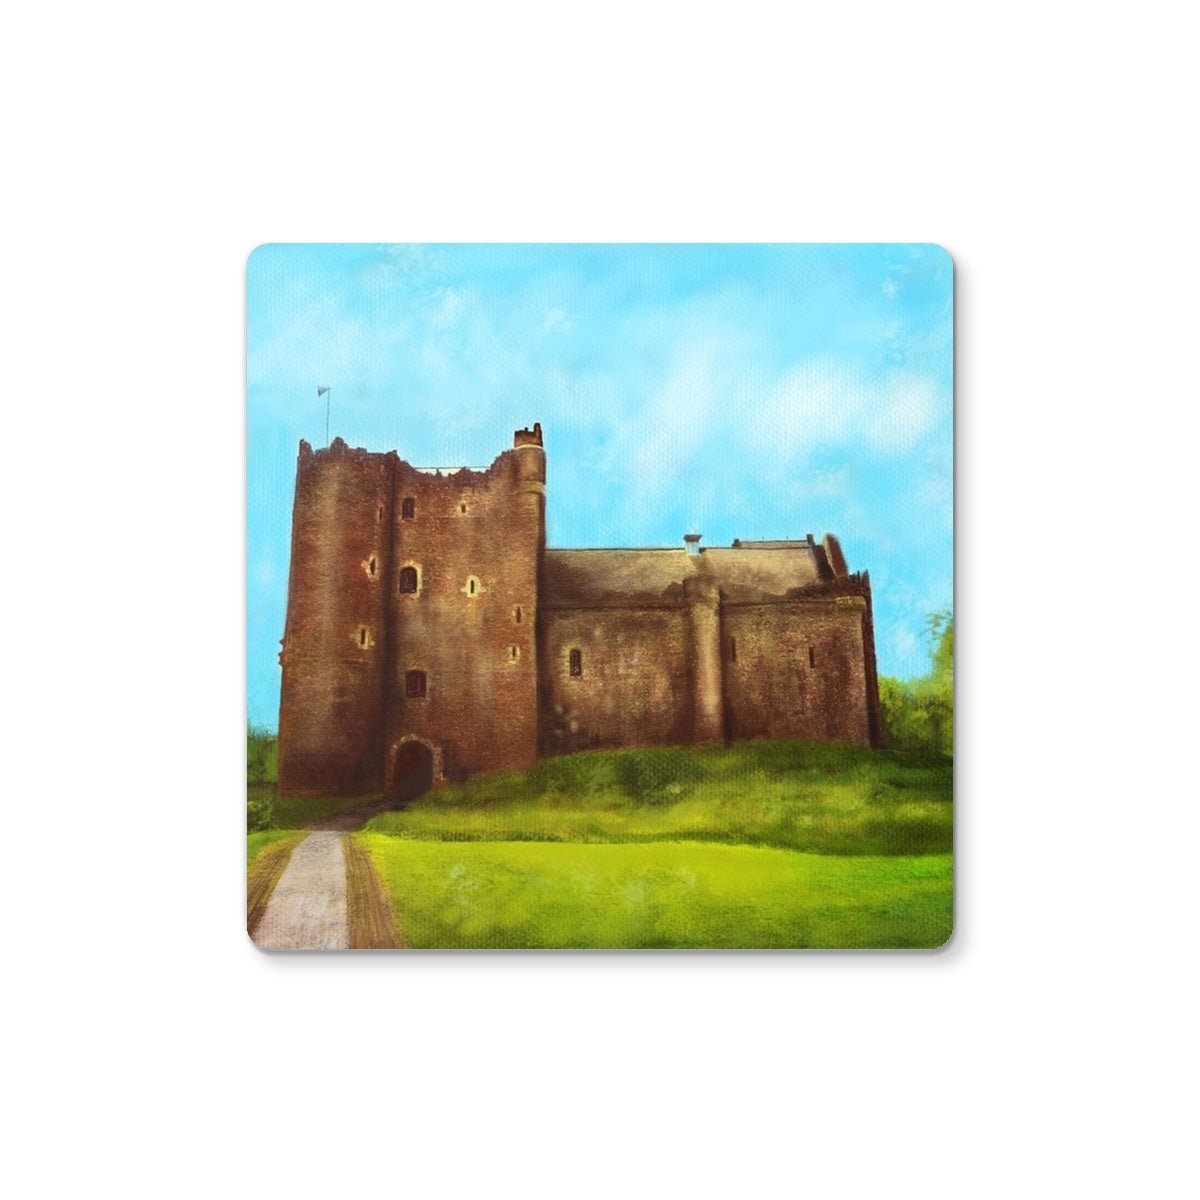 Doune Castle Art Gifts Coaster-Coasters-Scottish Castles Art Gallery-Single Coaster-Paintings, Prints, Homeware, Art Gifts From Scotland By Scottish Artist Kevin Hunter